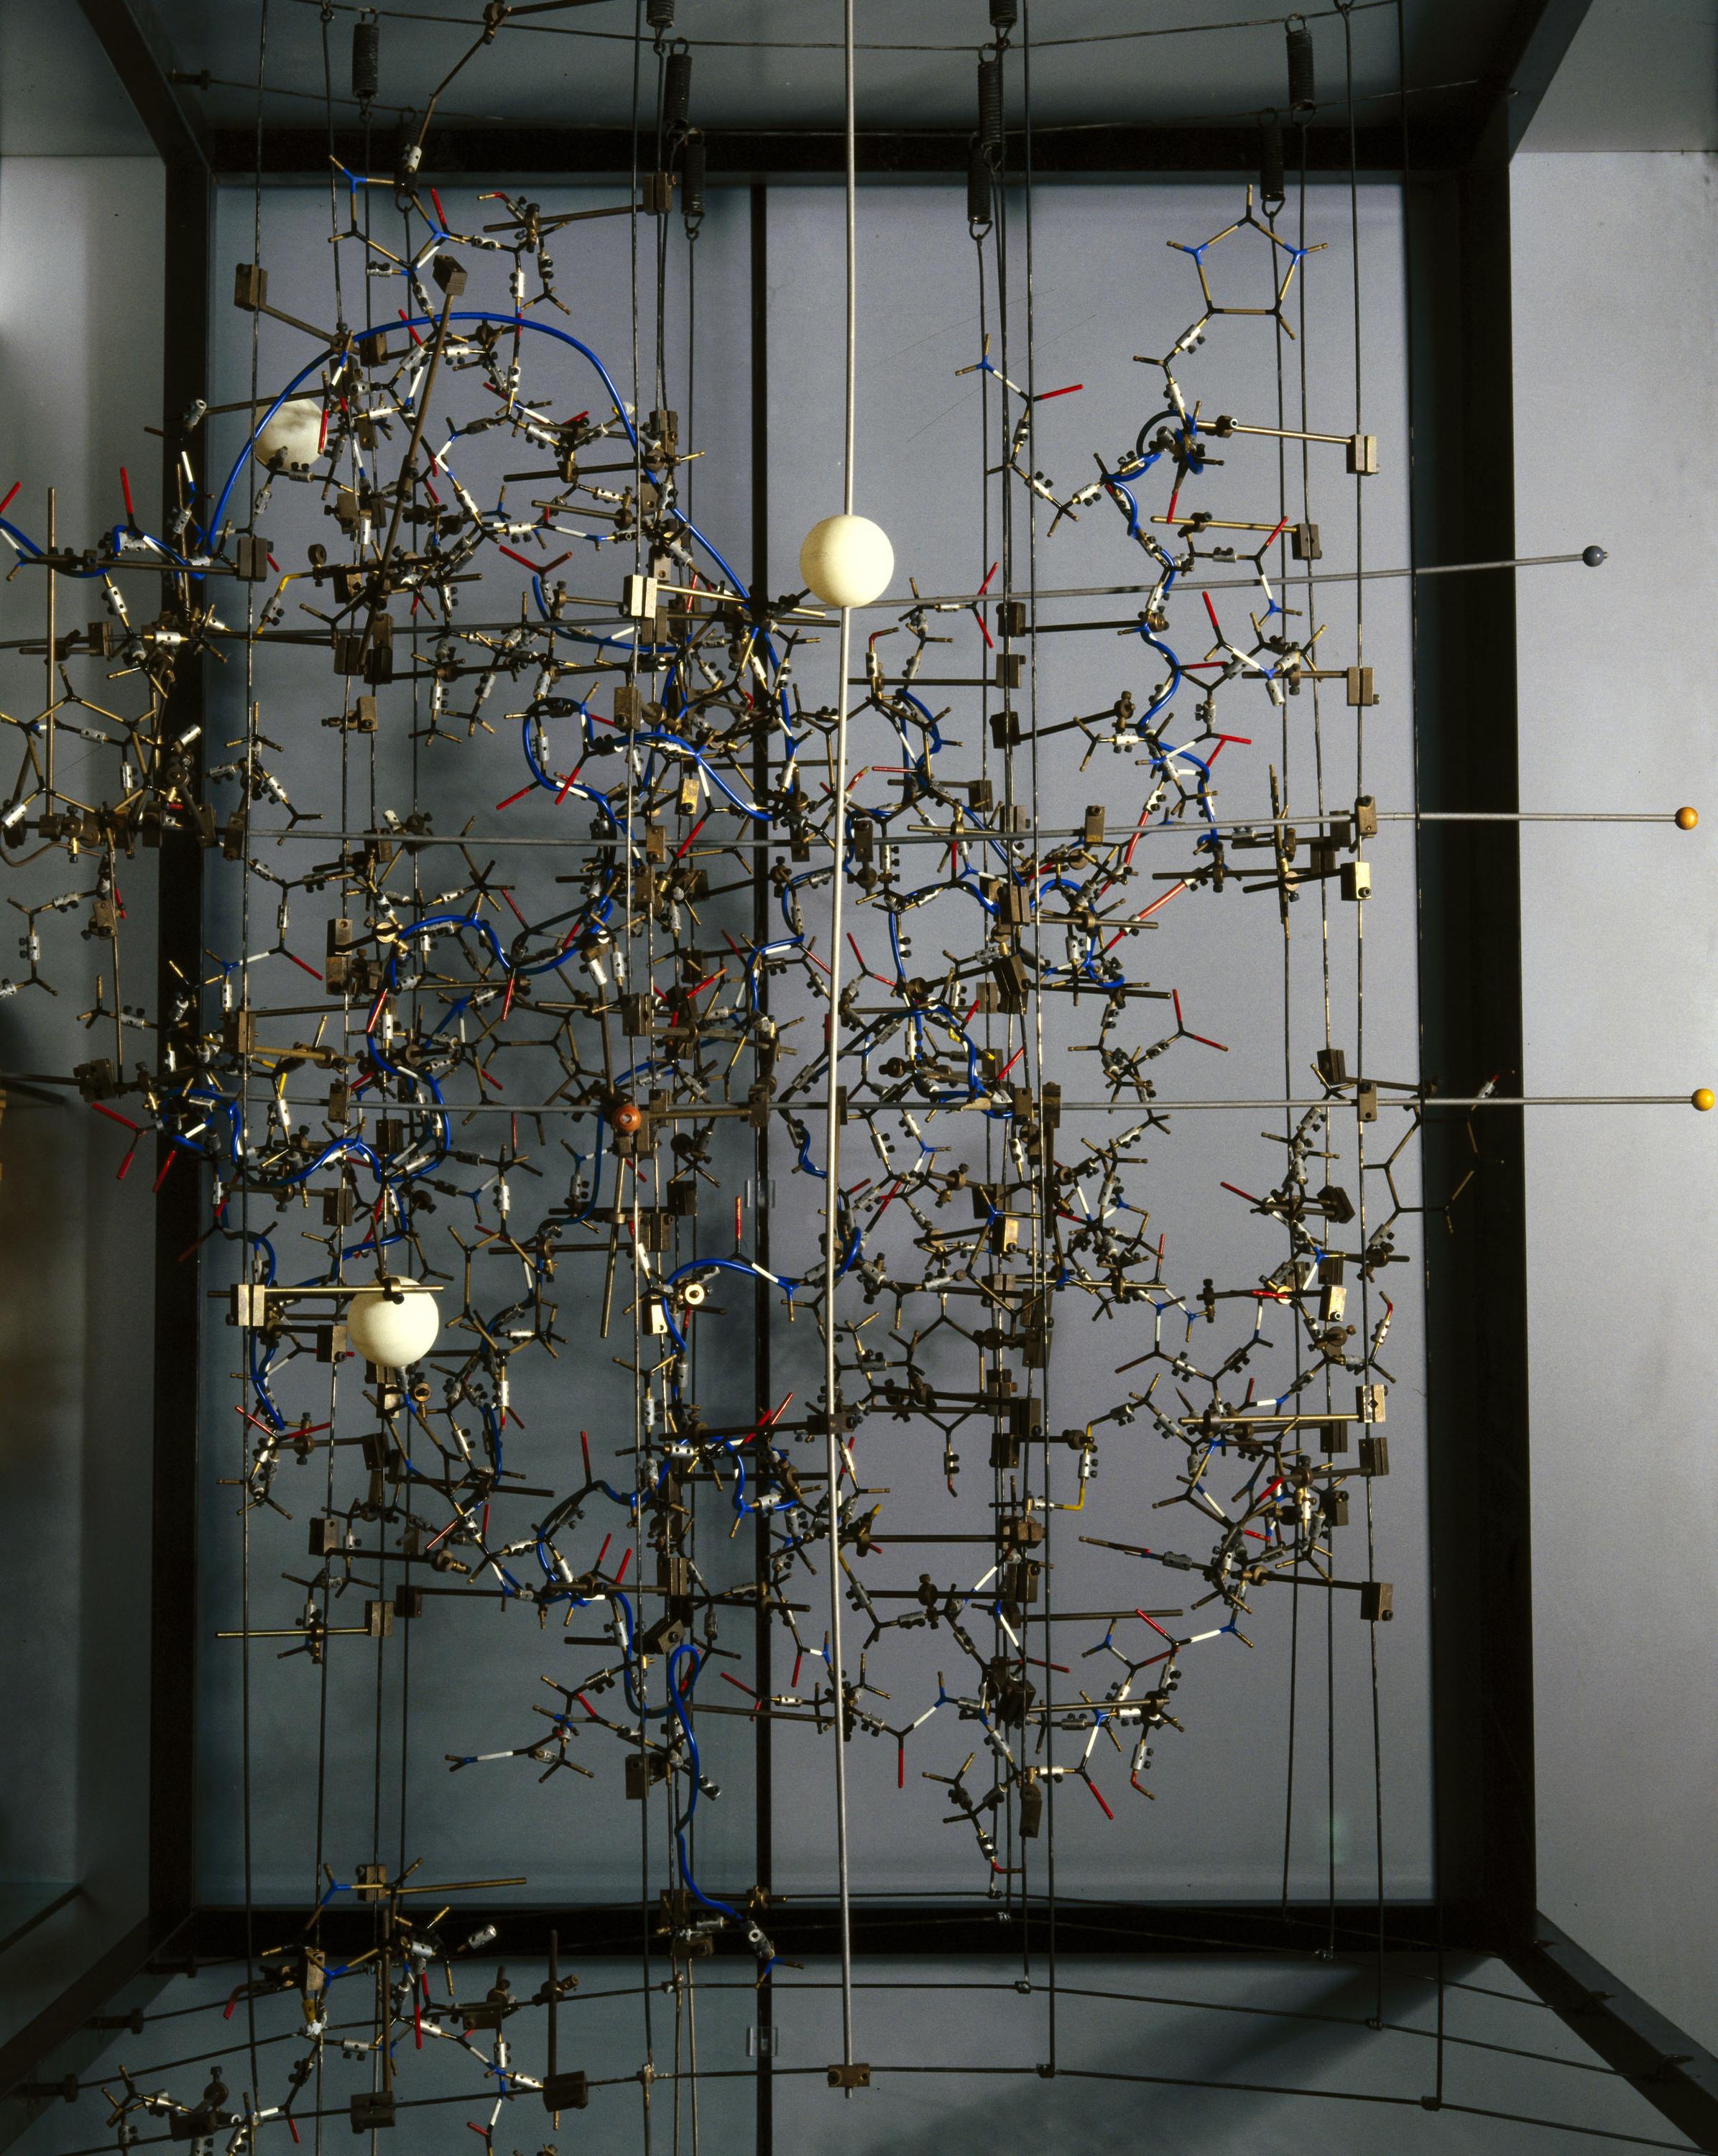 Model, one of two, made by Dorothy M. Crowfoot Hodgkin c.1967, to show the structure of 2 zinc pig insulin crystals at a resolution of 2.8A. Photographed as on display in gallery. Grey background.